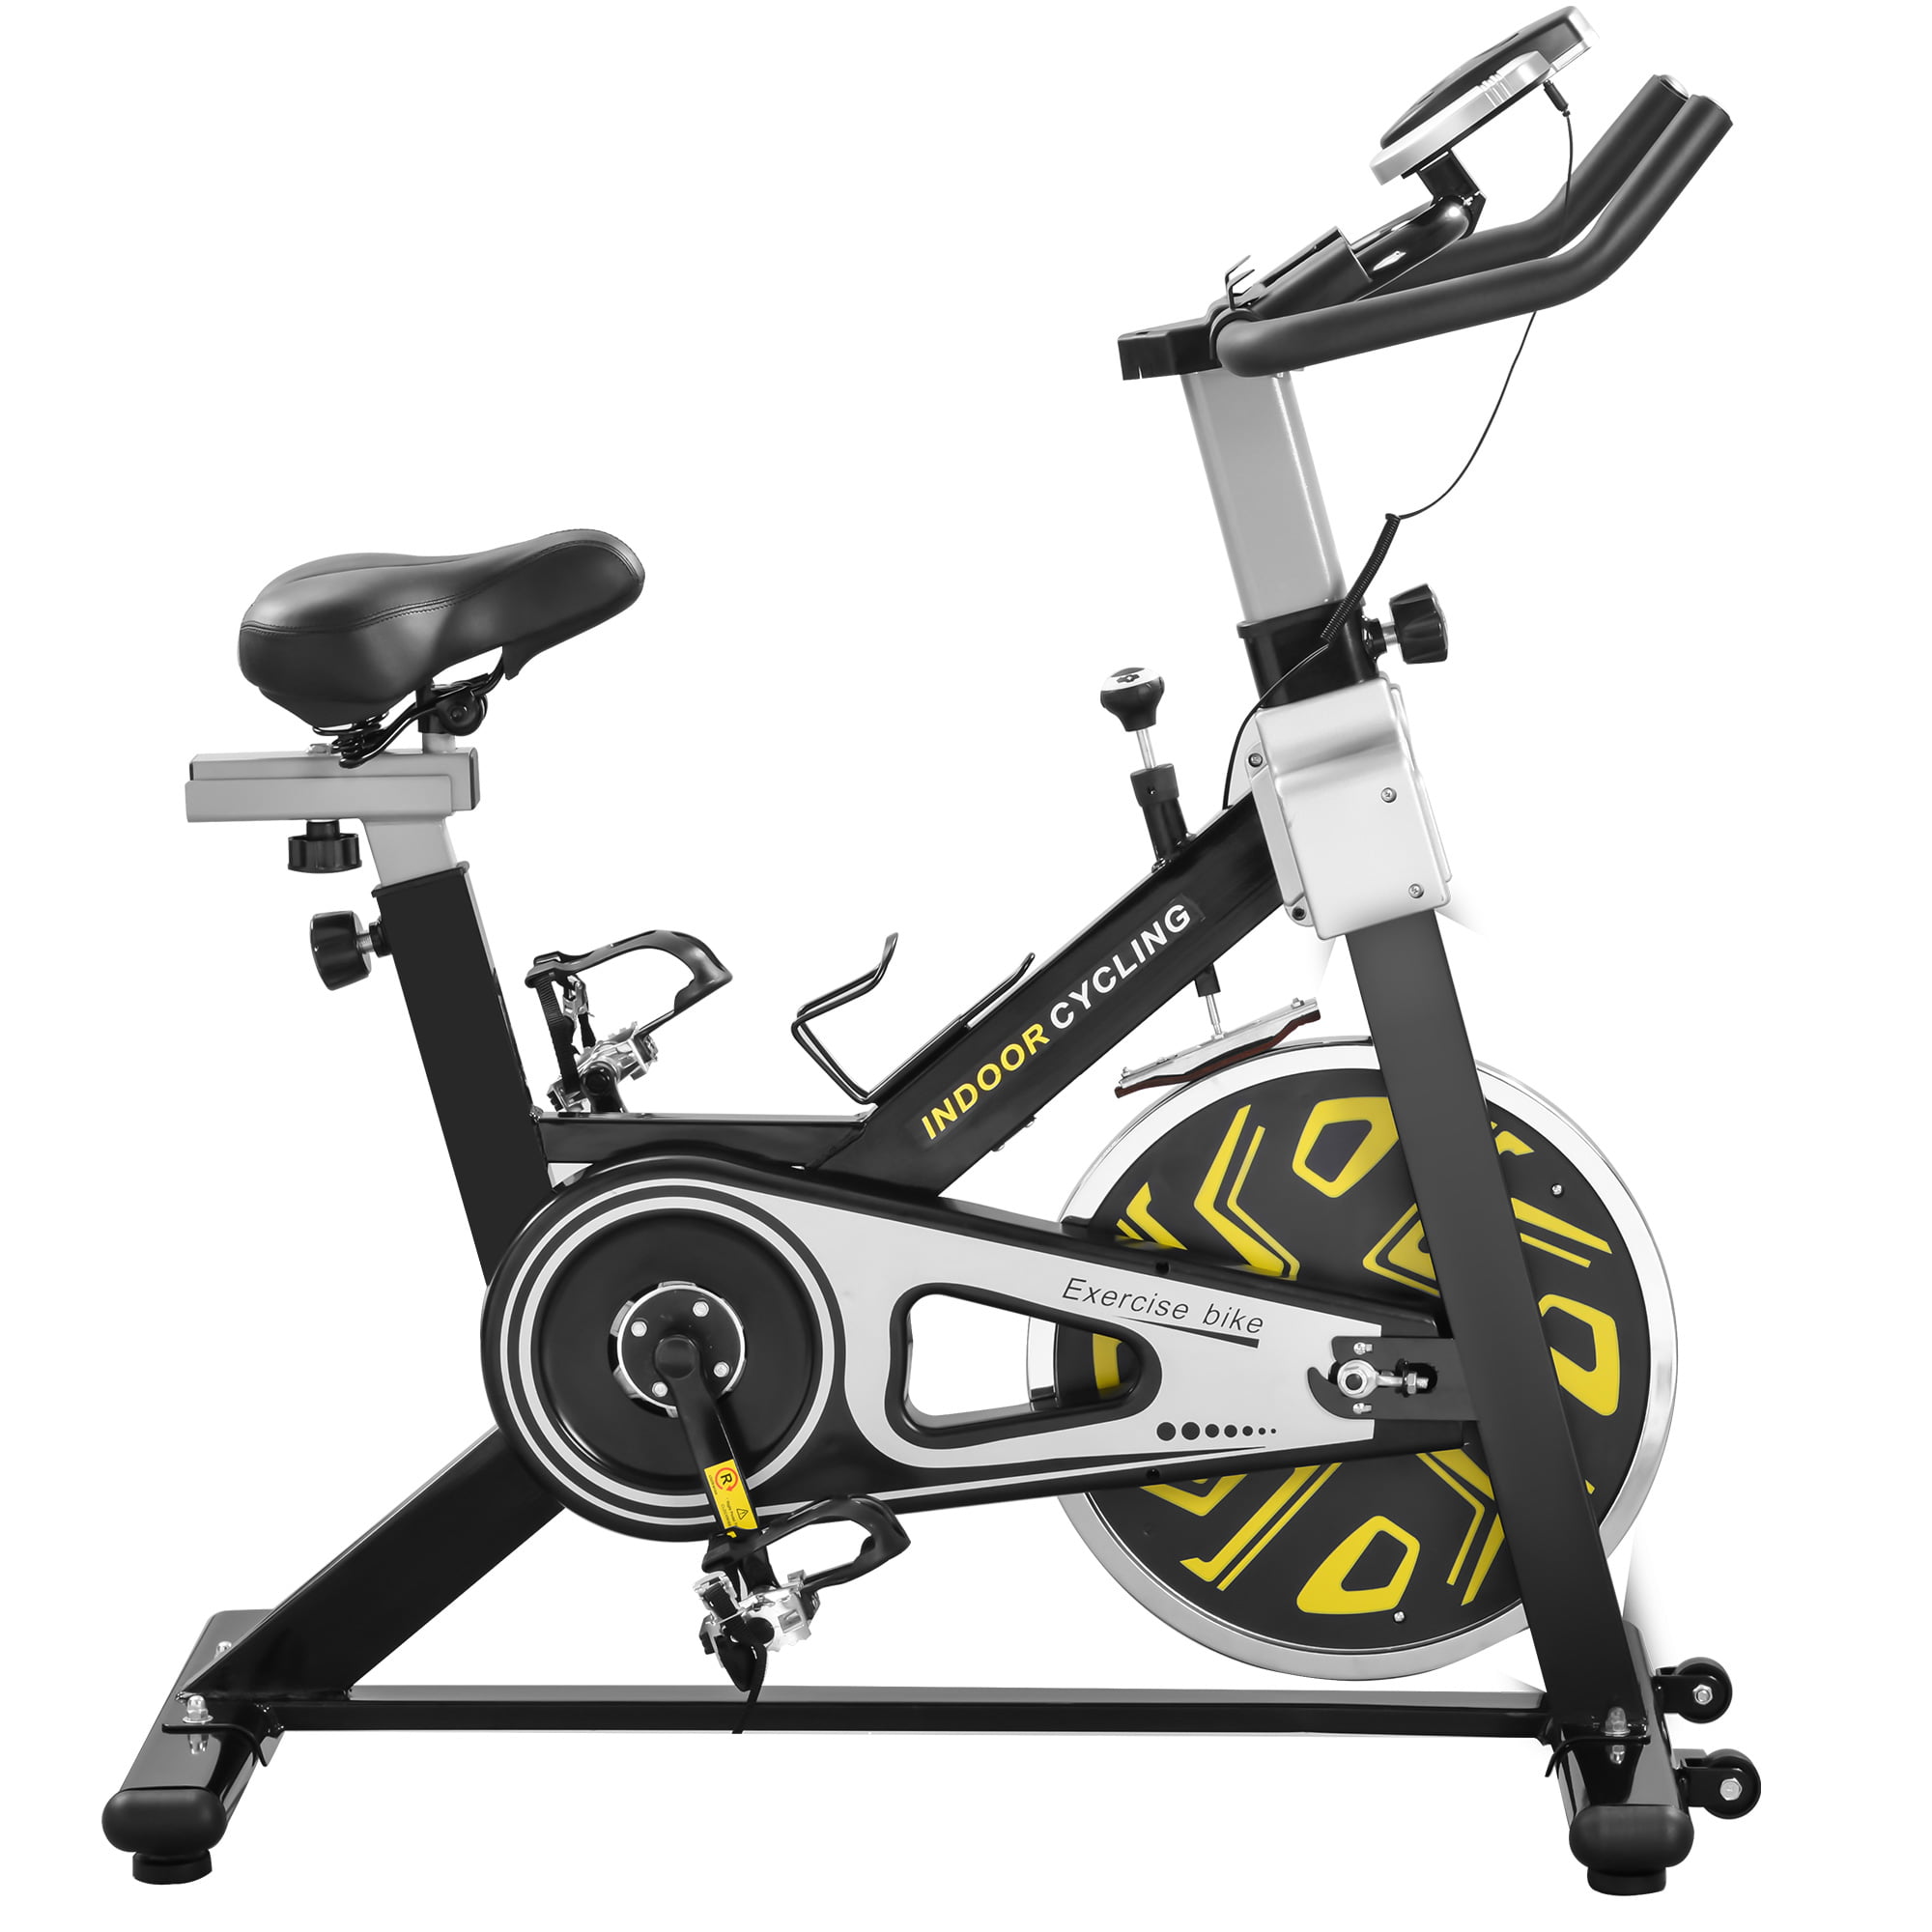 Details about   Stationary Exercise Bike Bicycle Cycling Training Cardio Workout Fitness Indoor 